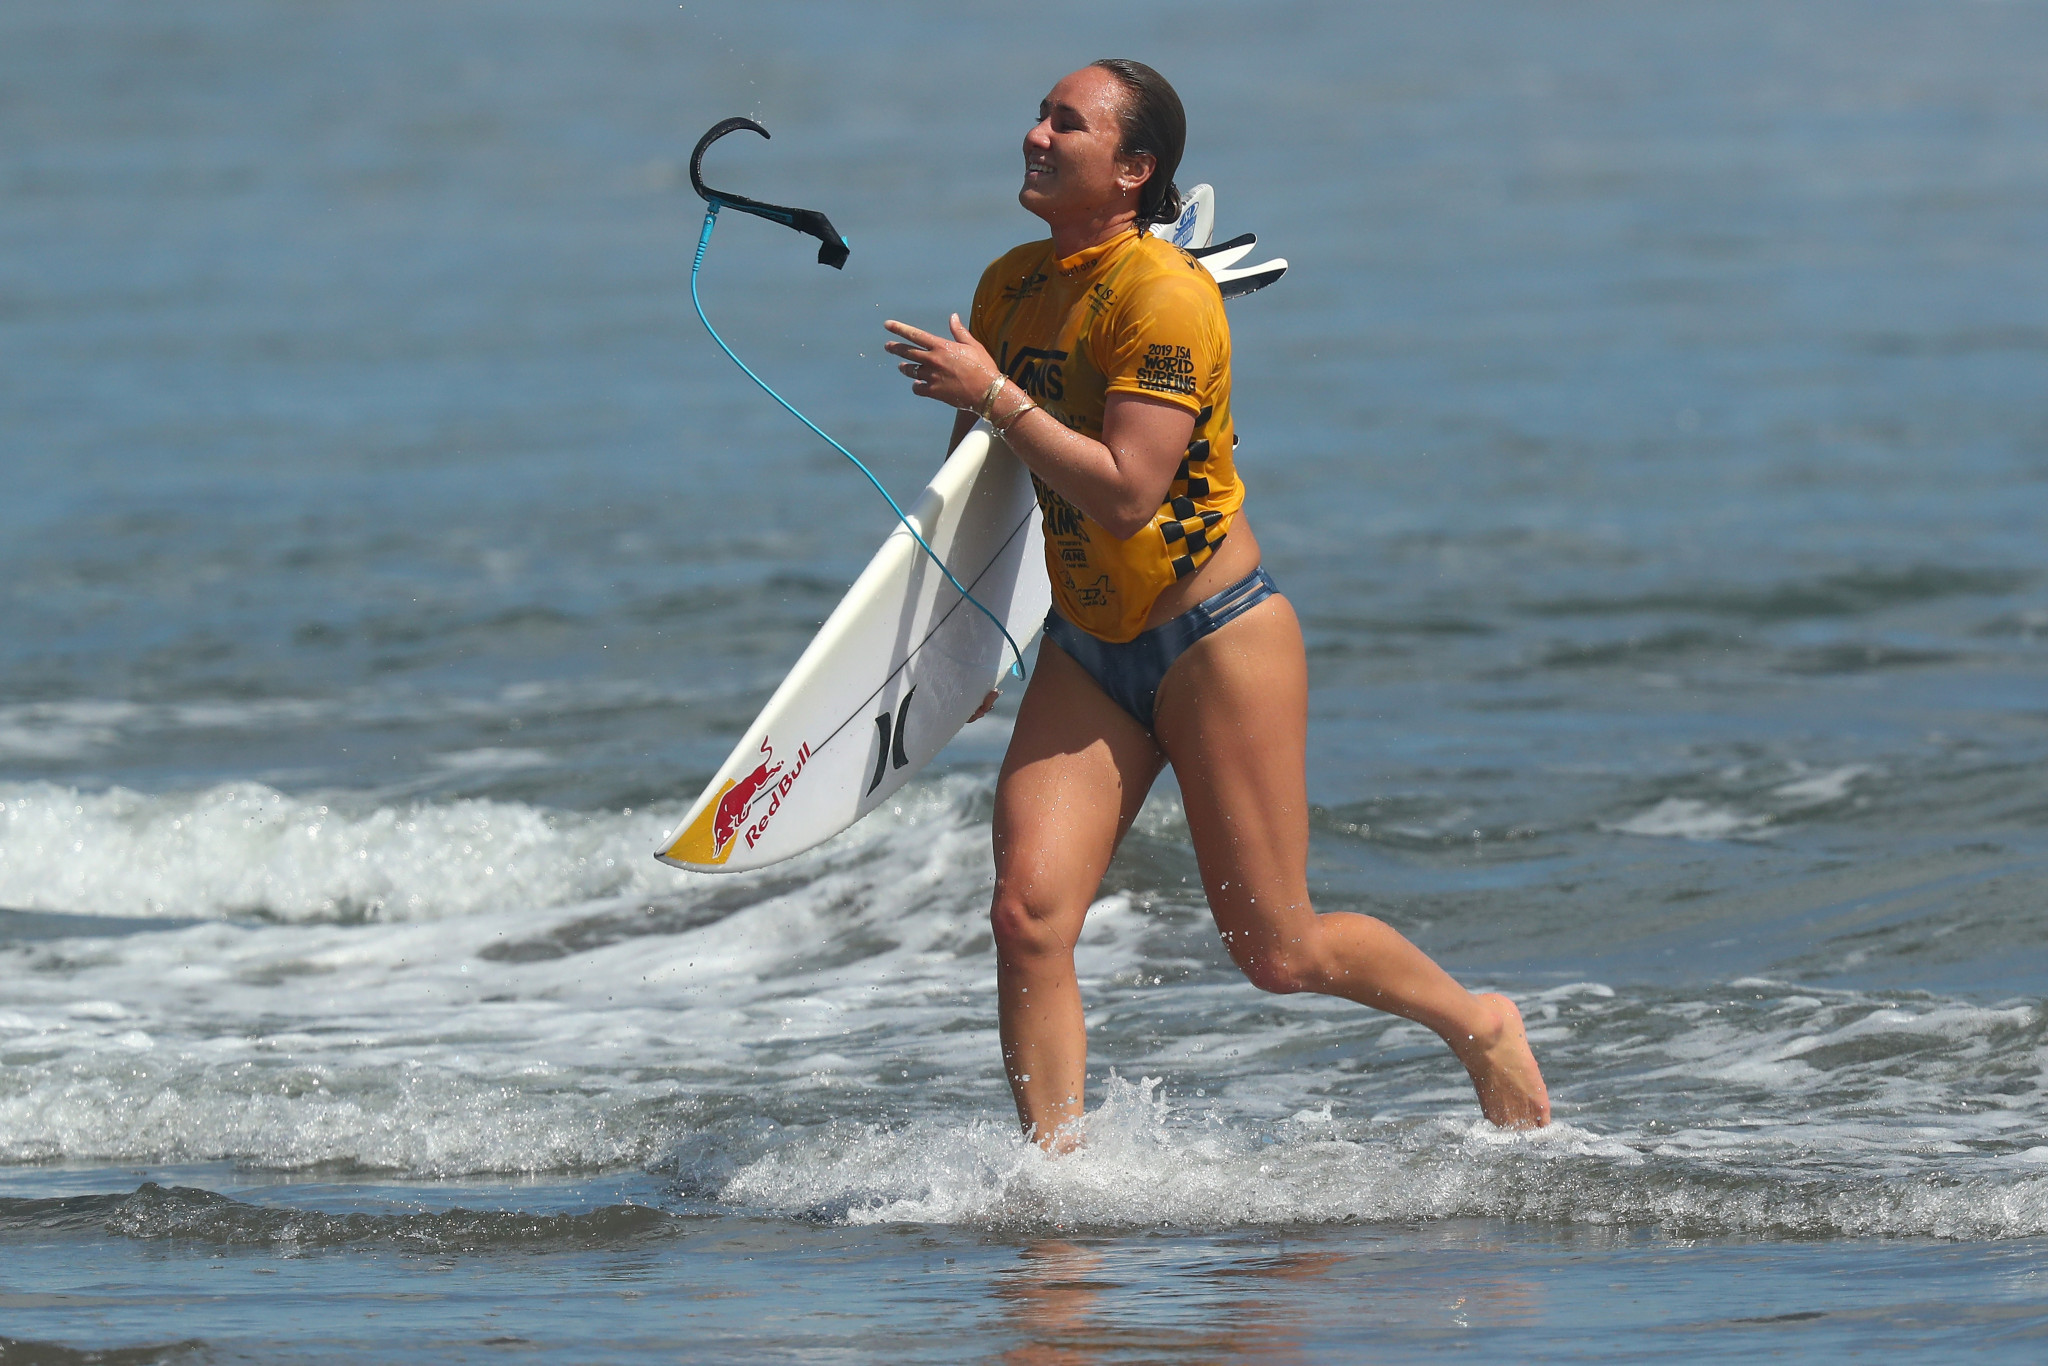 World number one thanks Makinohara as US surfers head to Chiba for Olympic competition